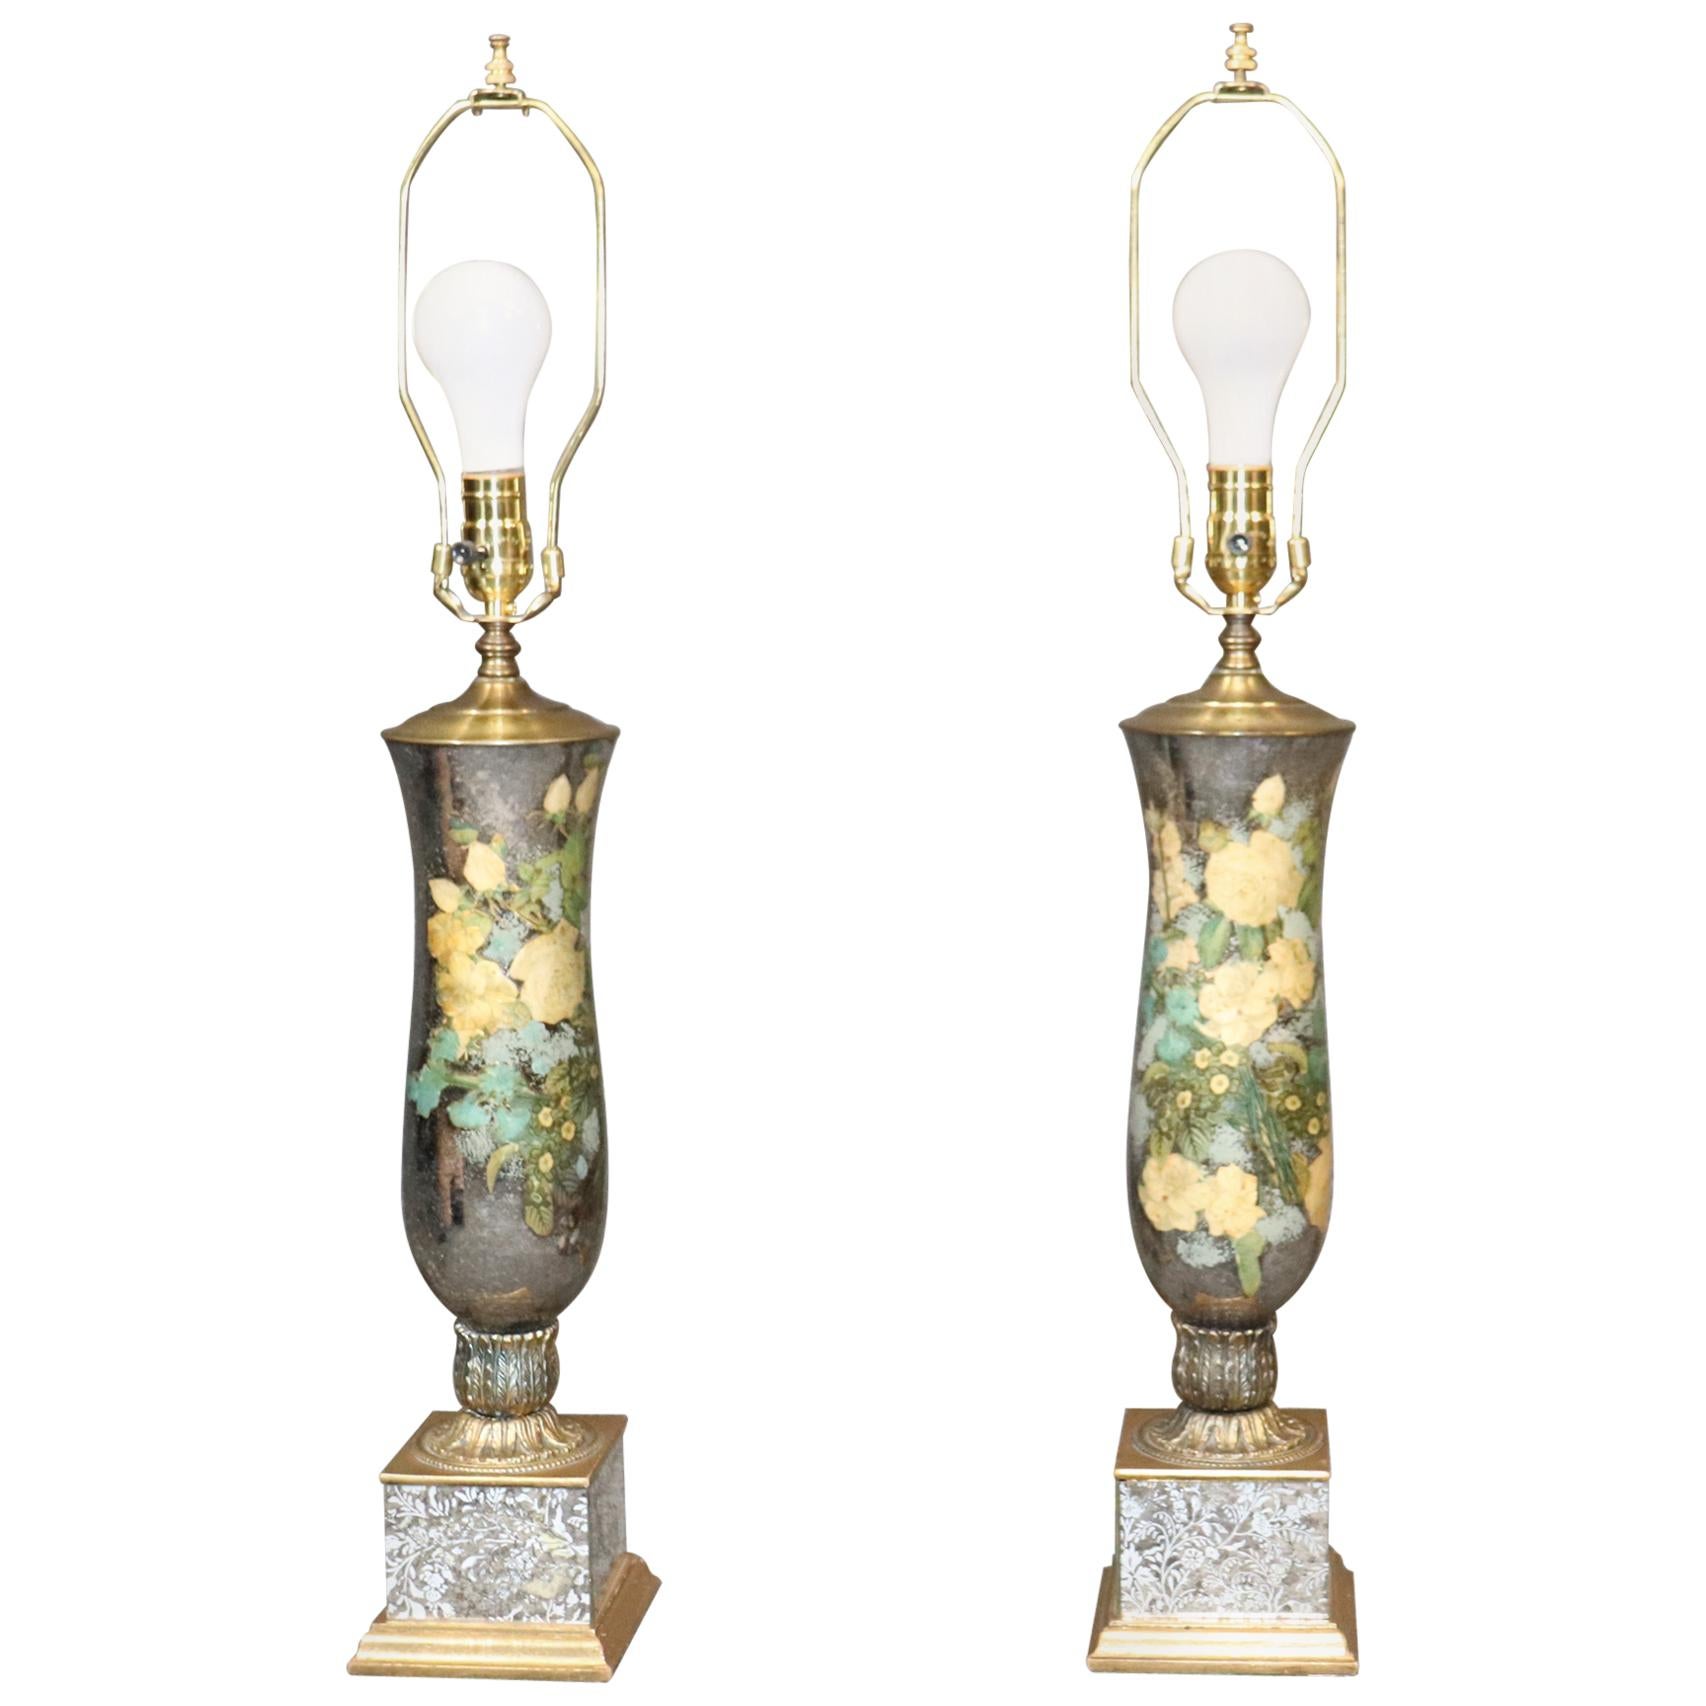 Pair of Fornasetti Style Silver Leaf Reverse Painted Églomisé Lamps with Bronze